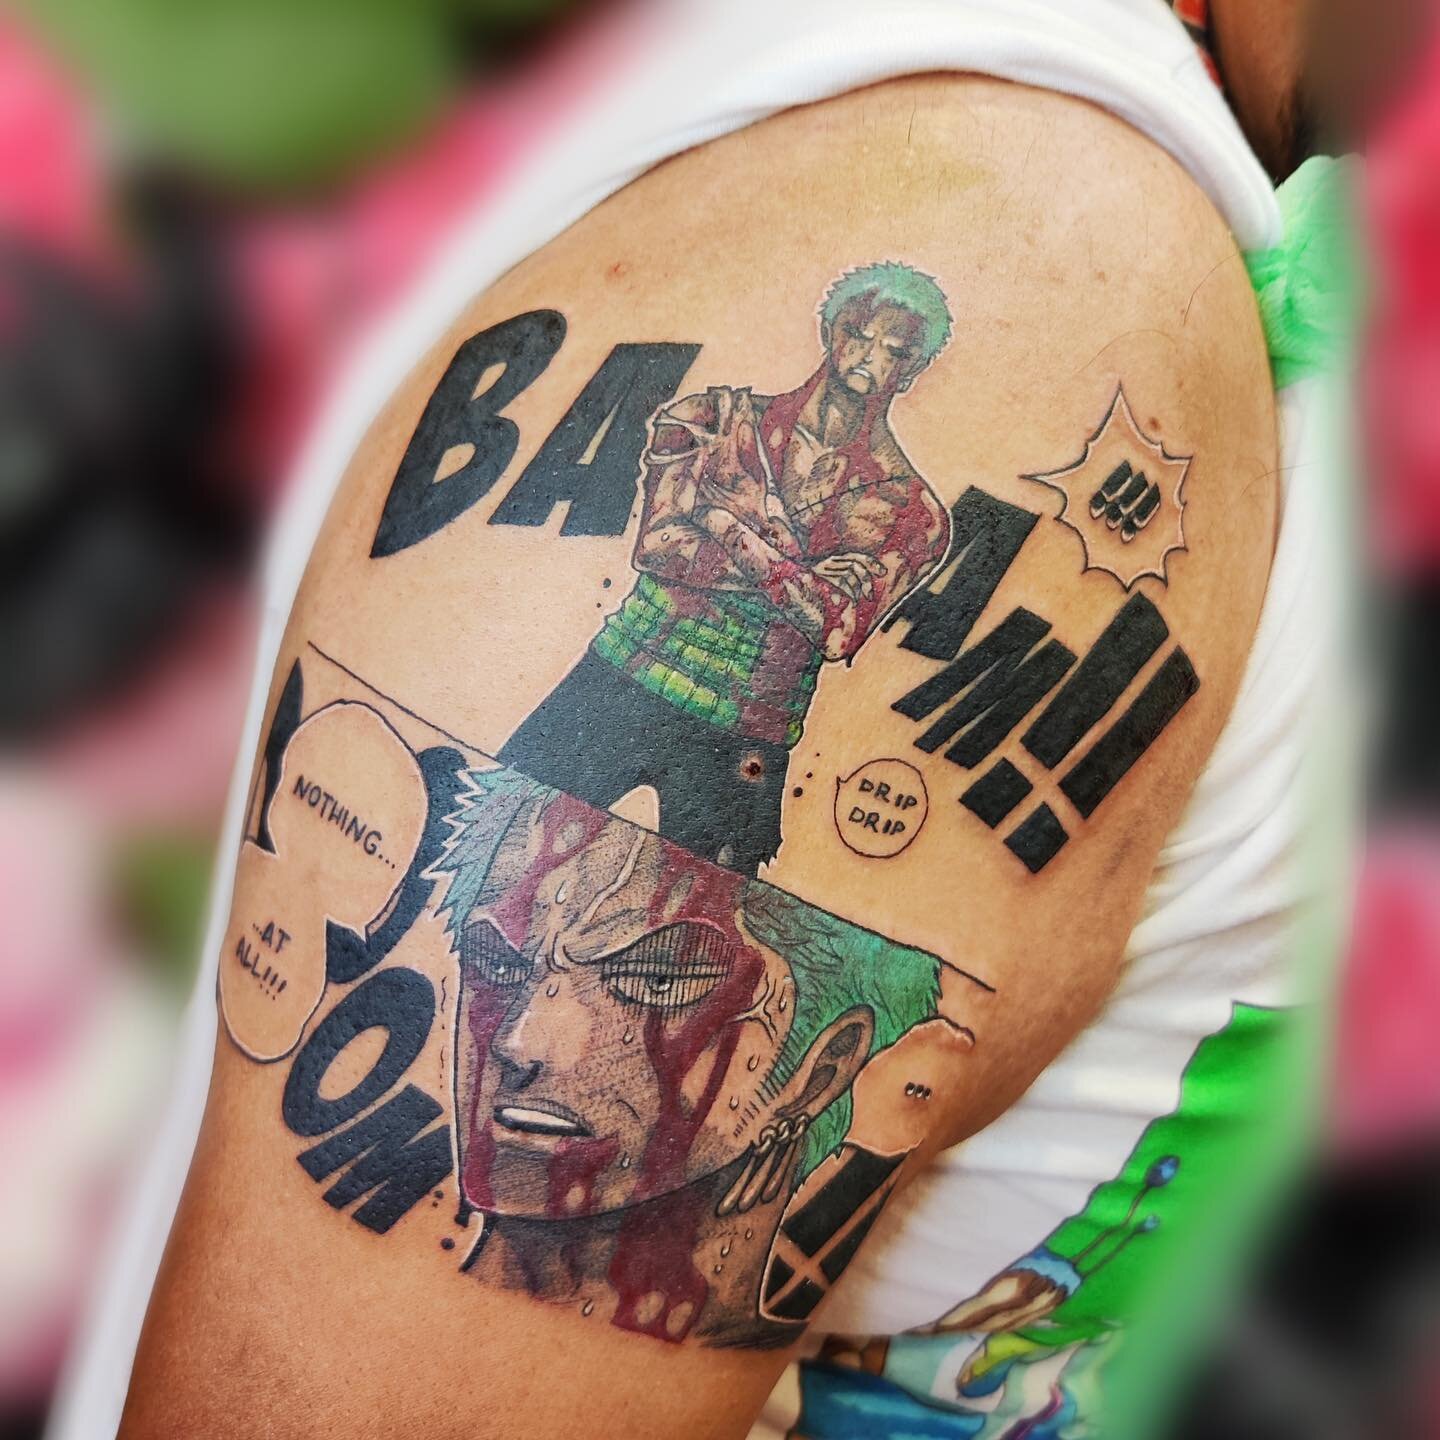 ⚔️ Z O R O 🗡 

Did this super awesome colored One Piece manga panel!! It was super awesome to do and I want to do more manga panels!

#onepiece #onepieceedit #onepieceanime #onepiecetattoo #onepiecetattooidea #animetattoo #mangatattoo #mangapanel  #